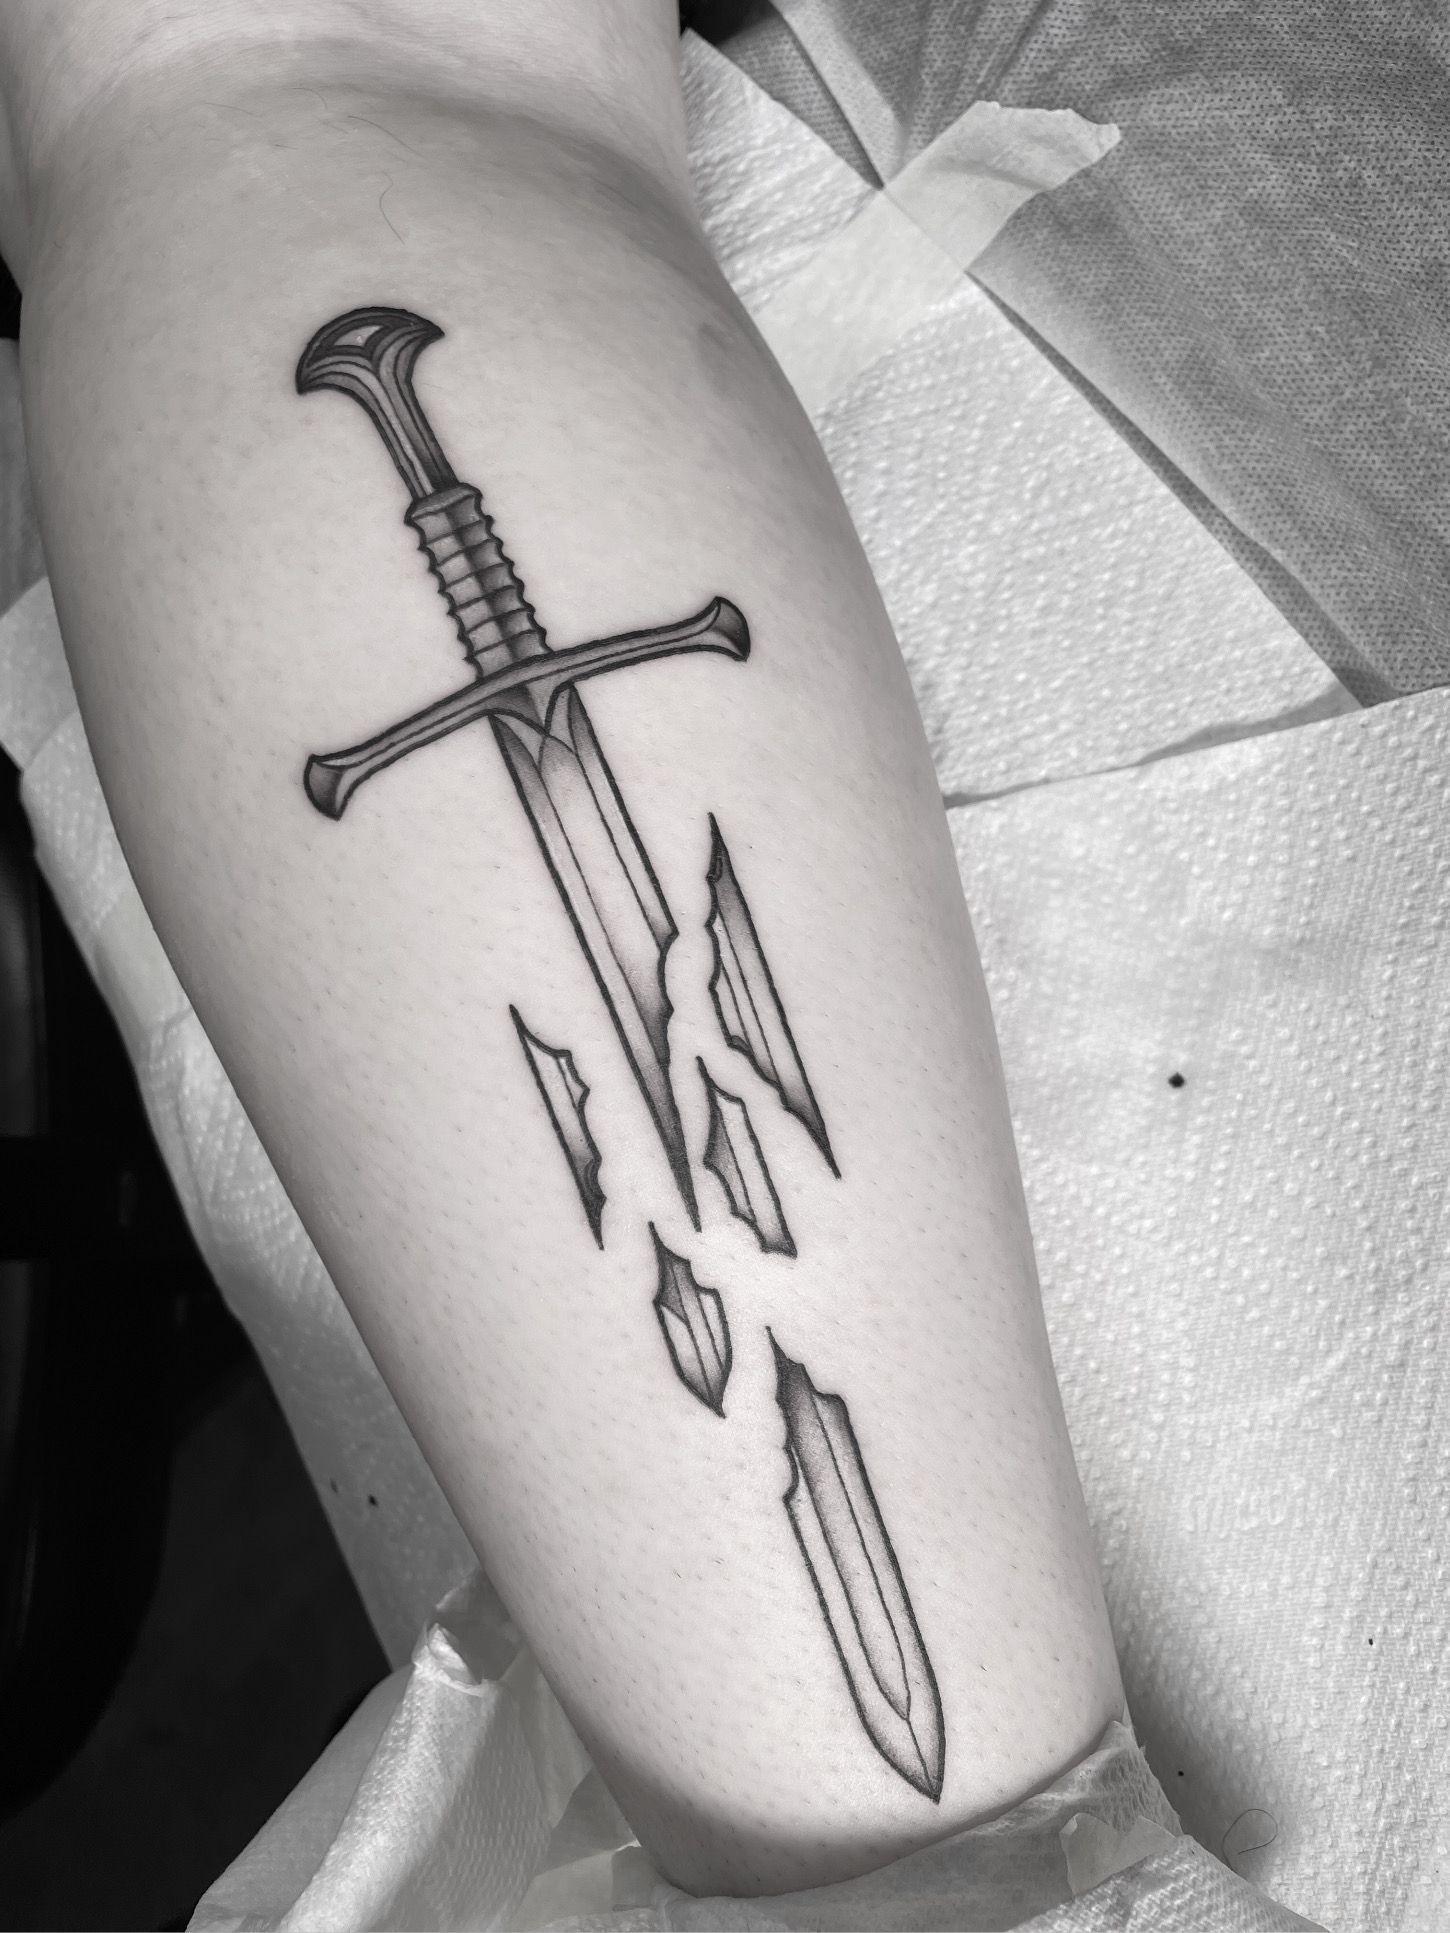 How To Draw A Sword Tattoo || Easy Tattoo Drawing - YouTube